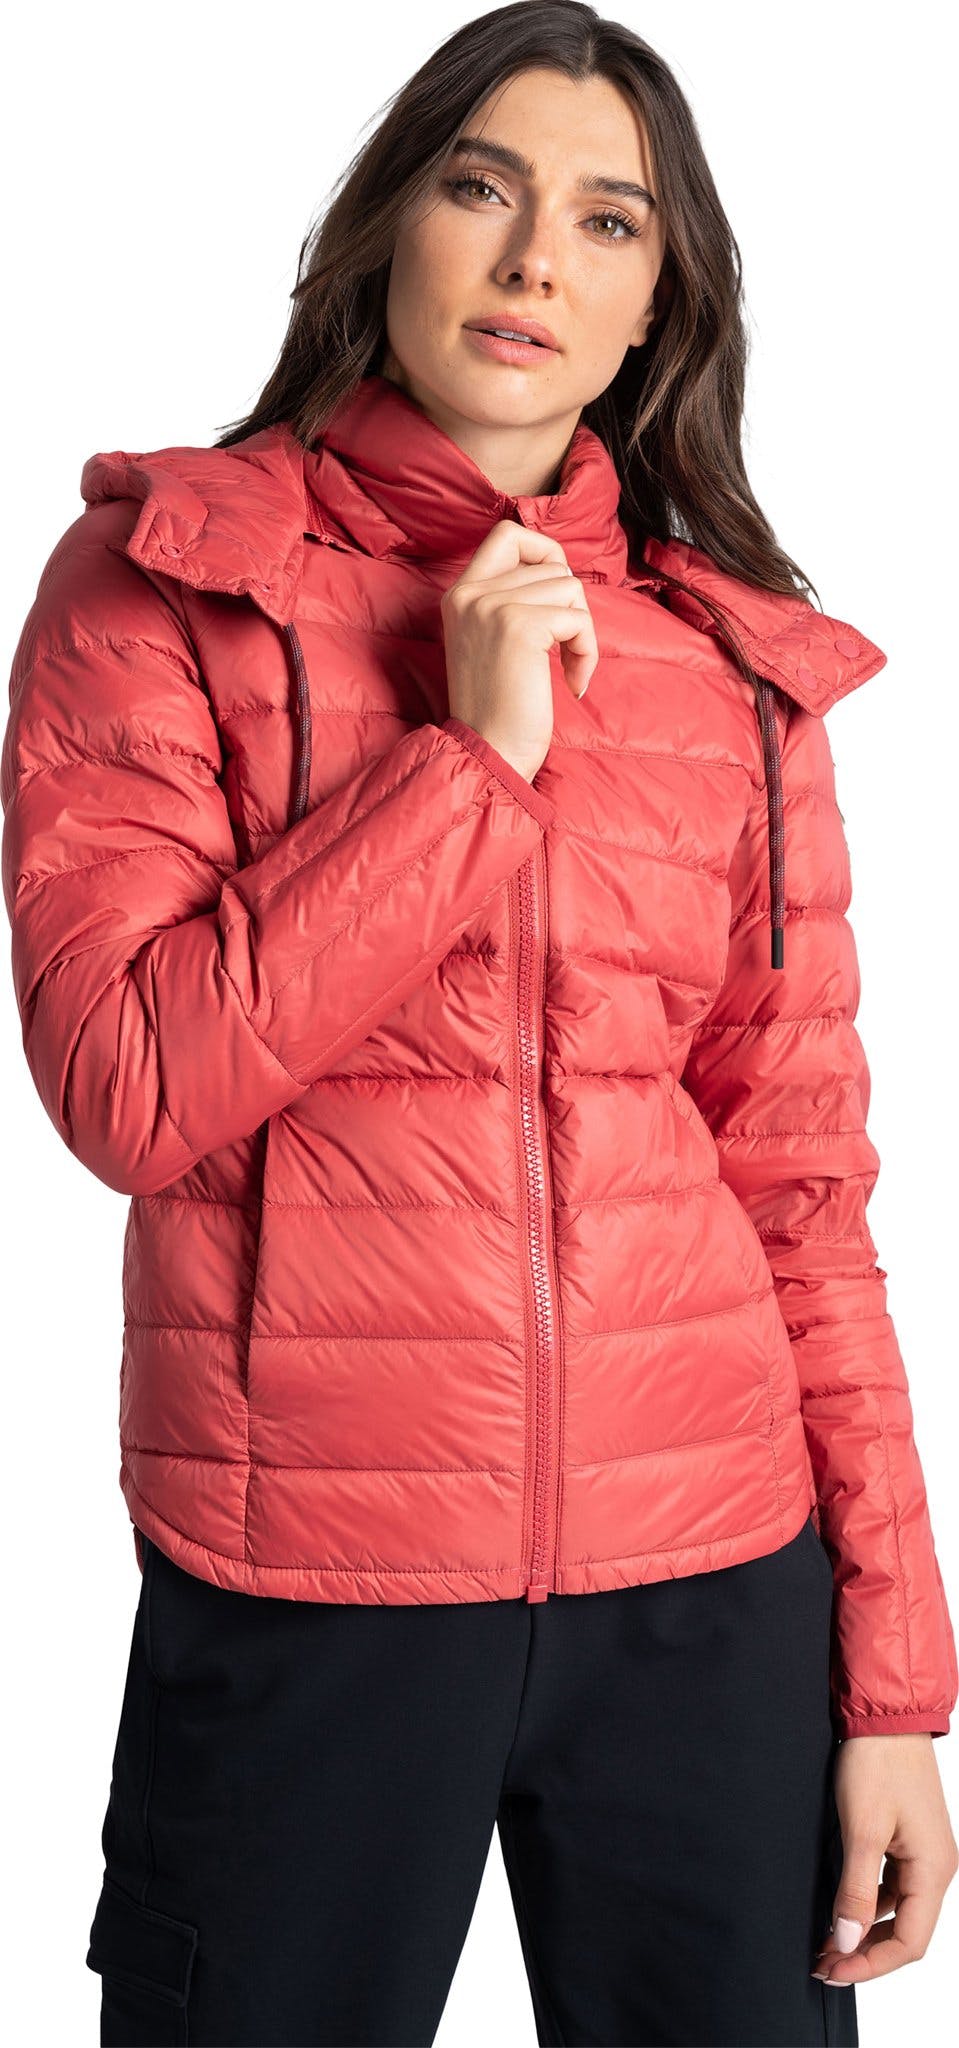 Product image for Emeline Down Jacket - Women's